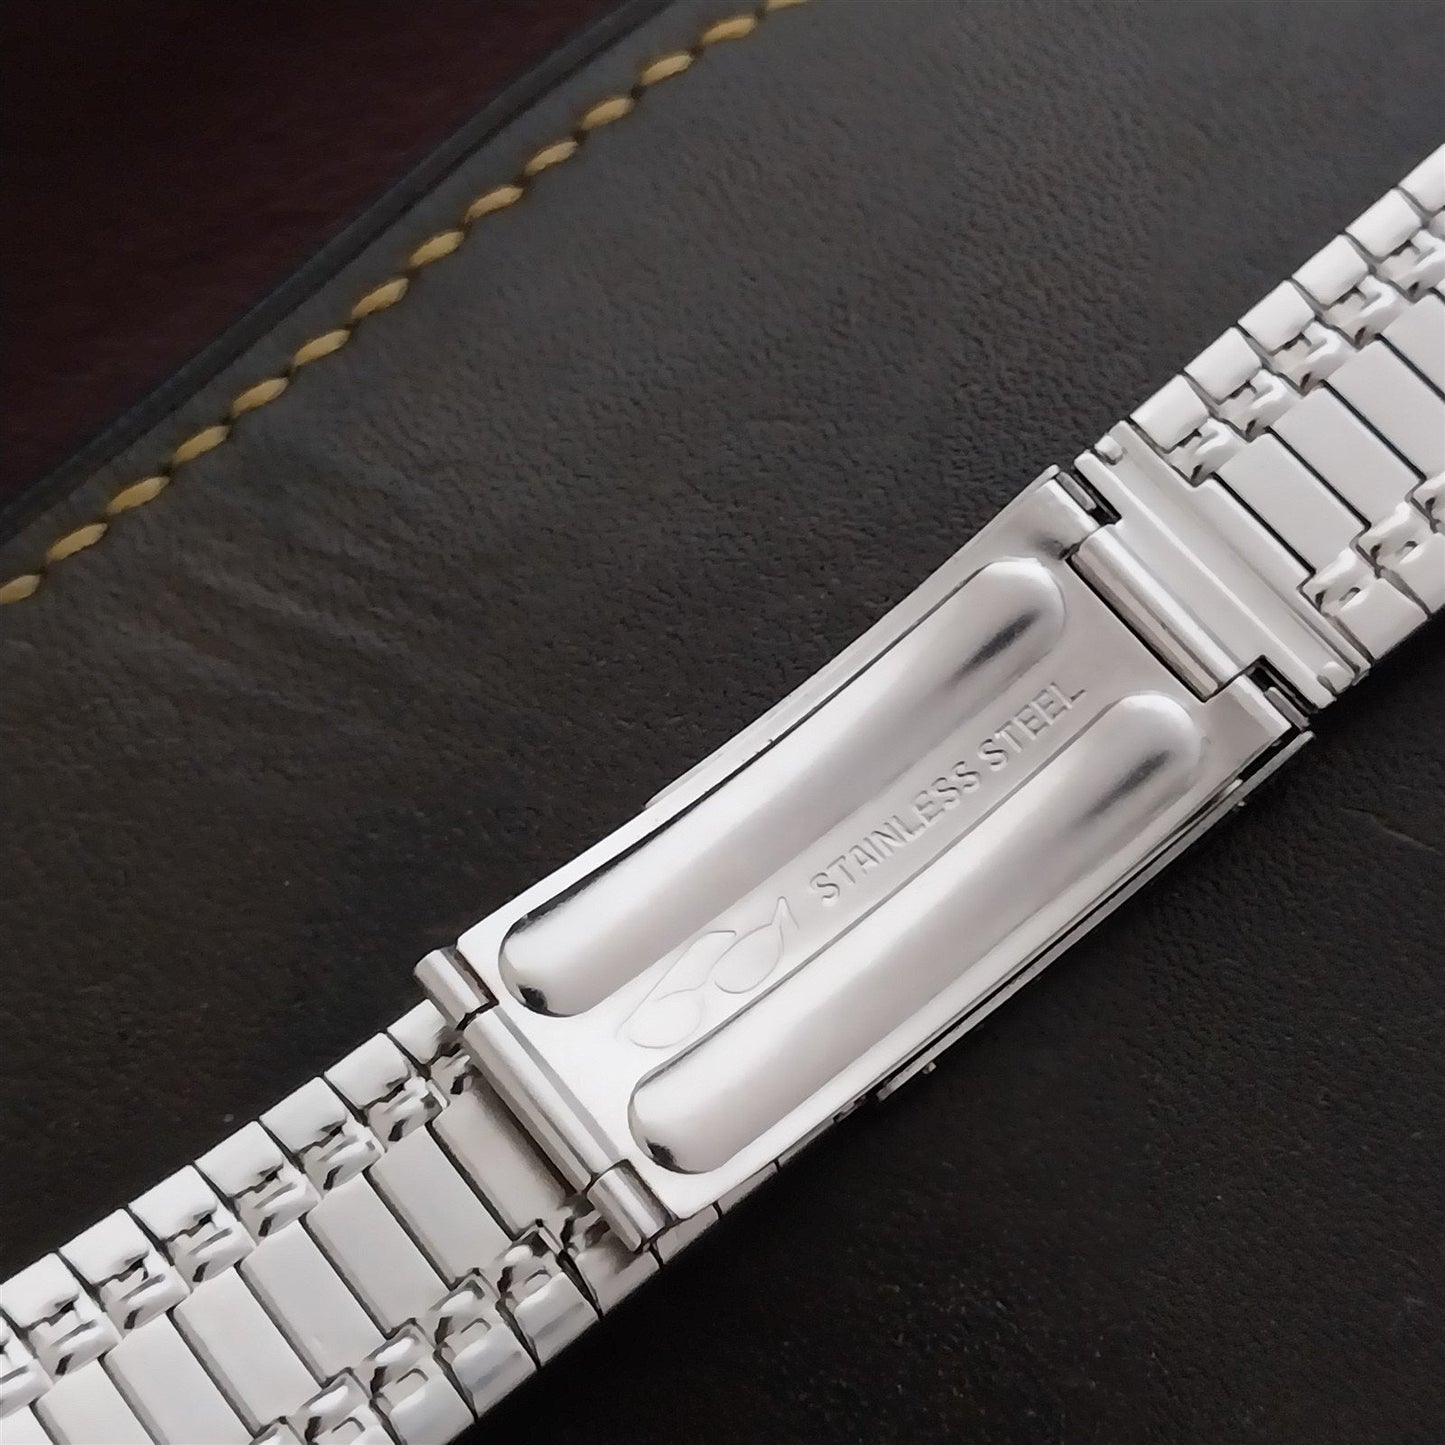 18mm Stainless Steel Deployment 1960s-1970s Vintage Watch Band